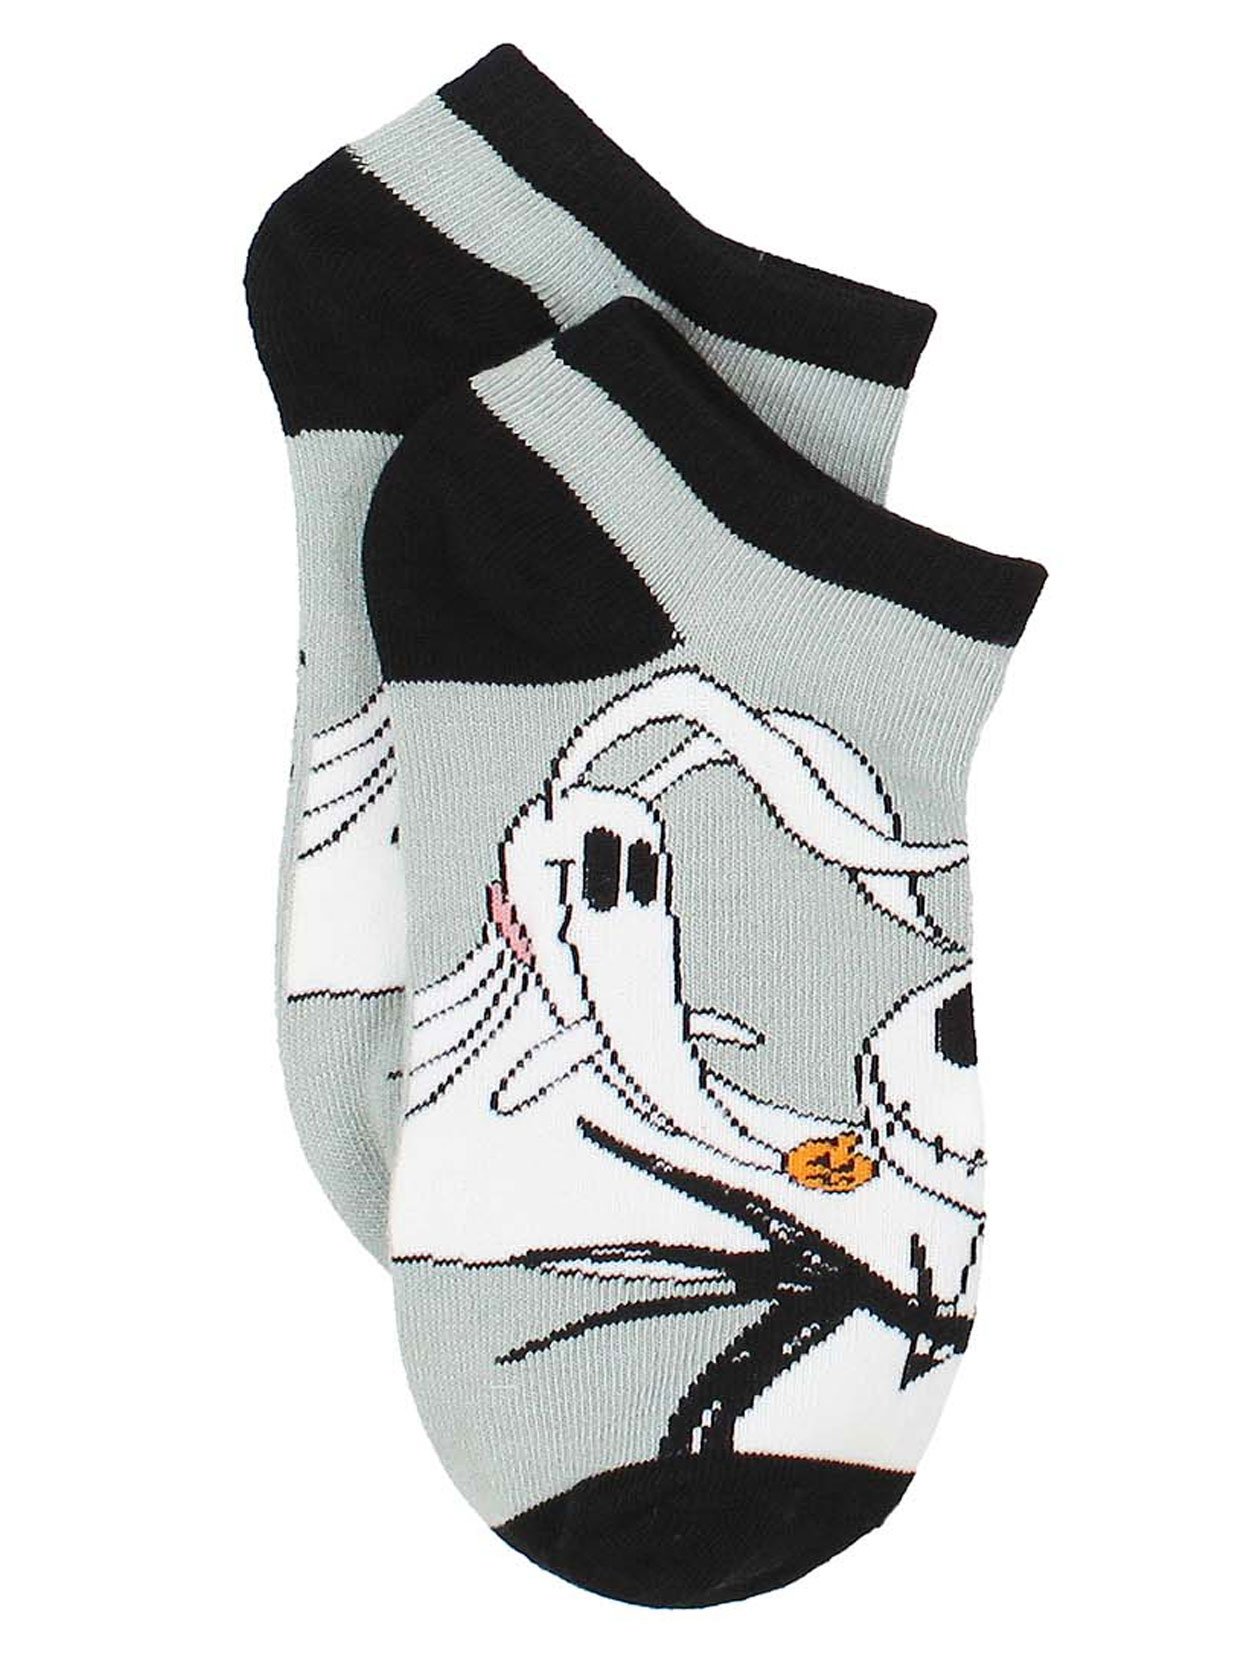 The Nightmare Before Christmas Womens 6 Pack No Show Socks NB047XNS - image 2 of 7